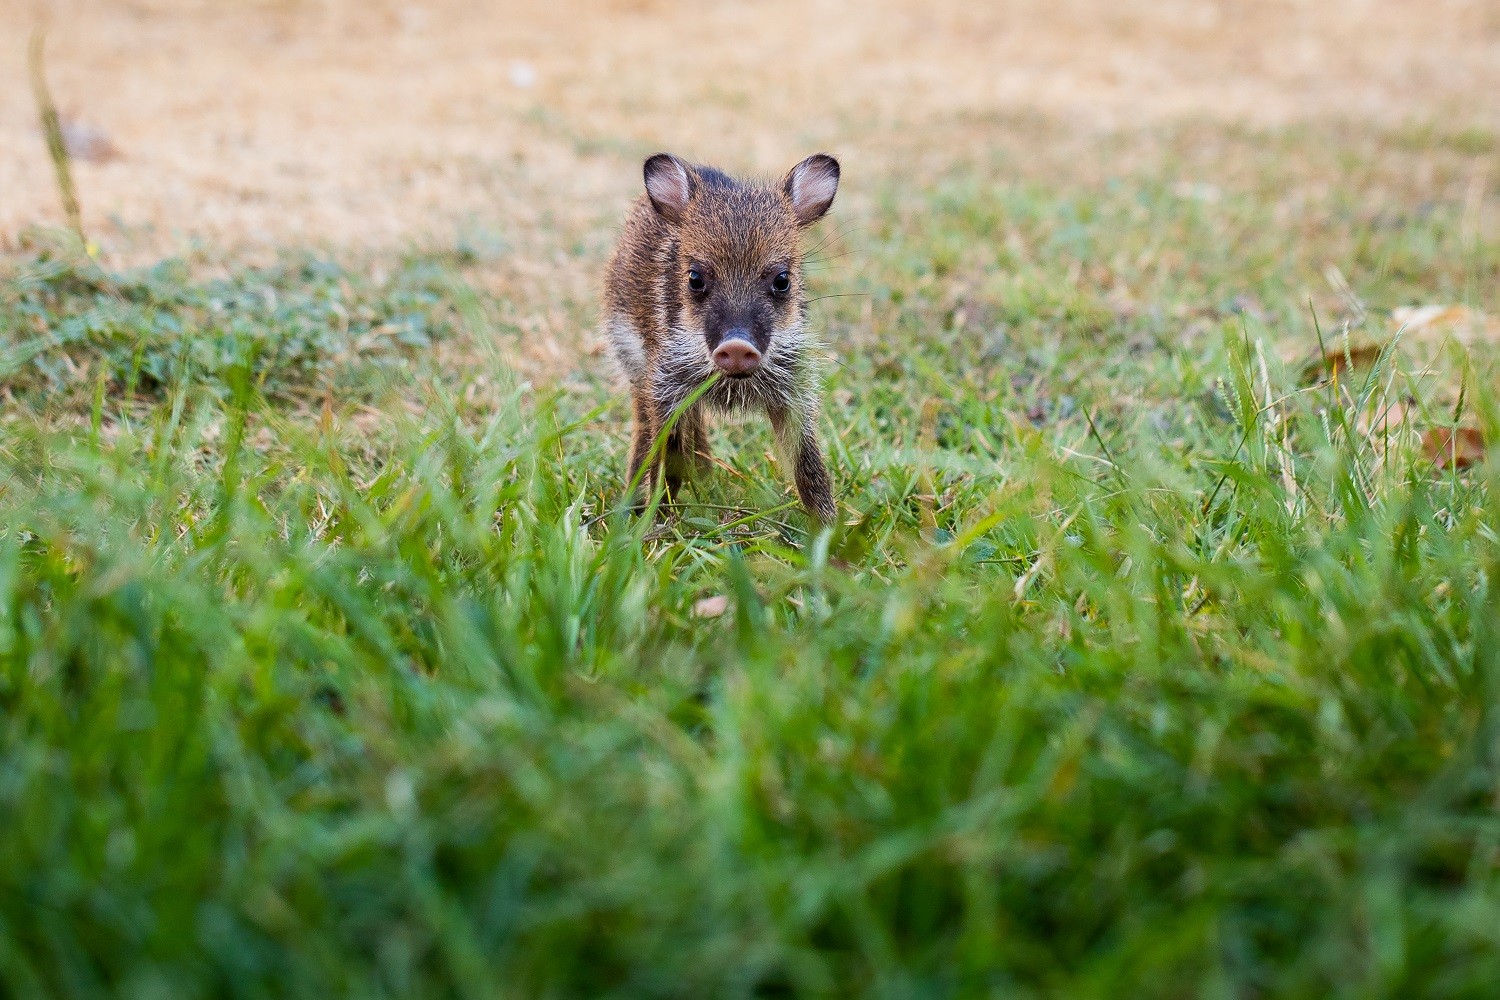 A baby peccary walking in grass